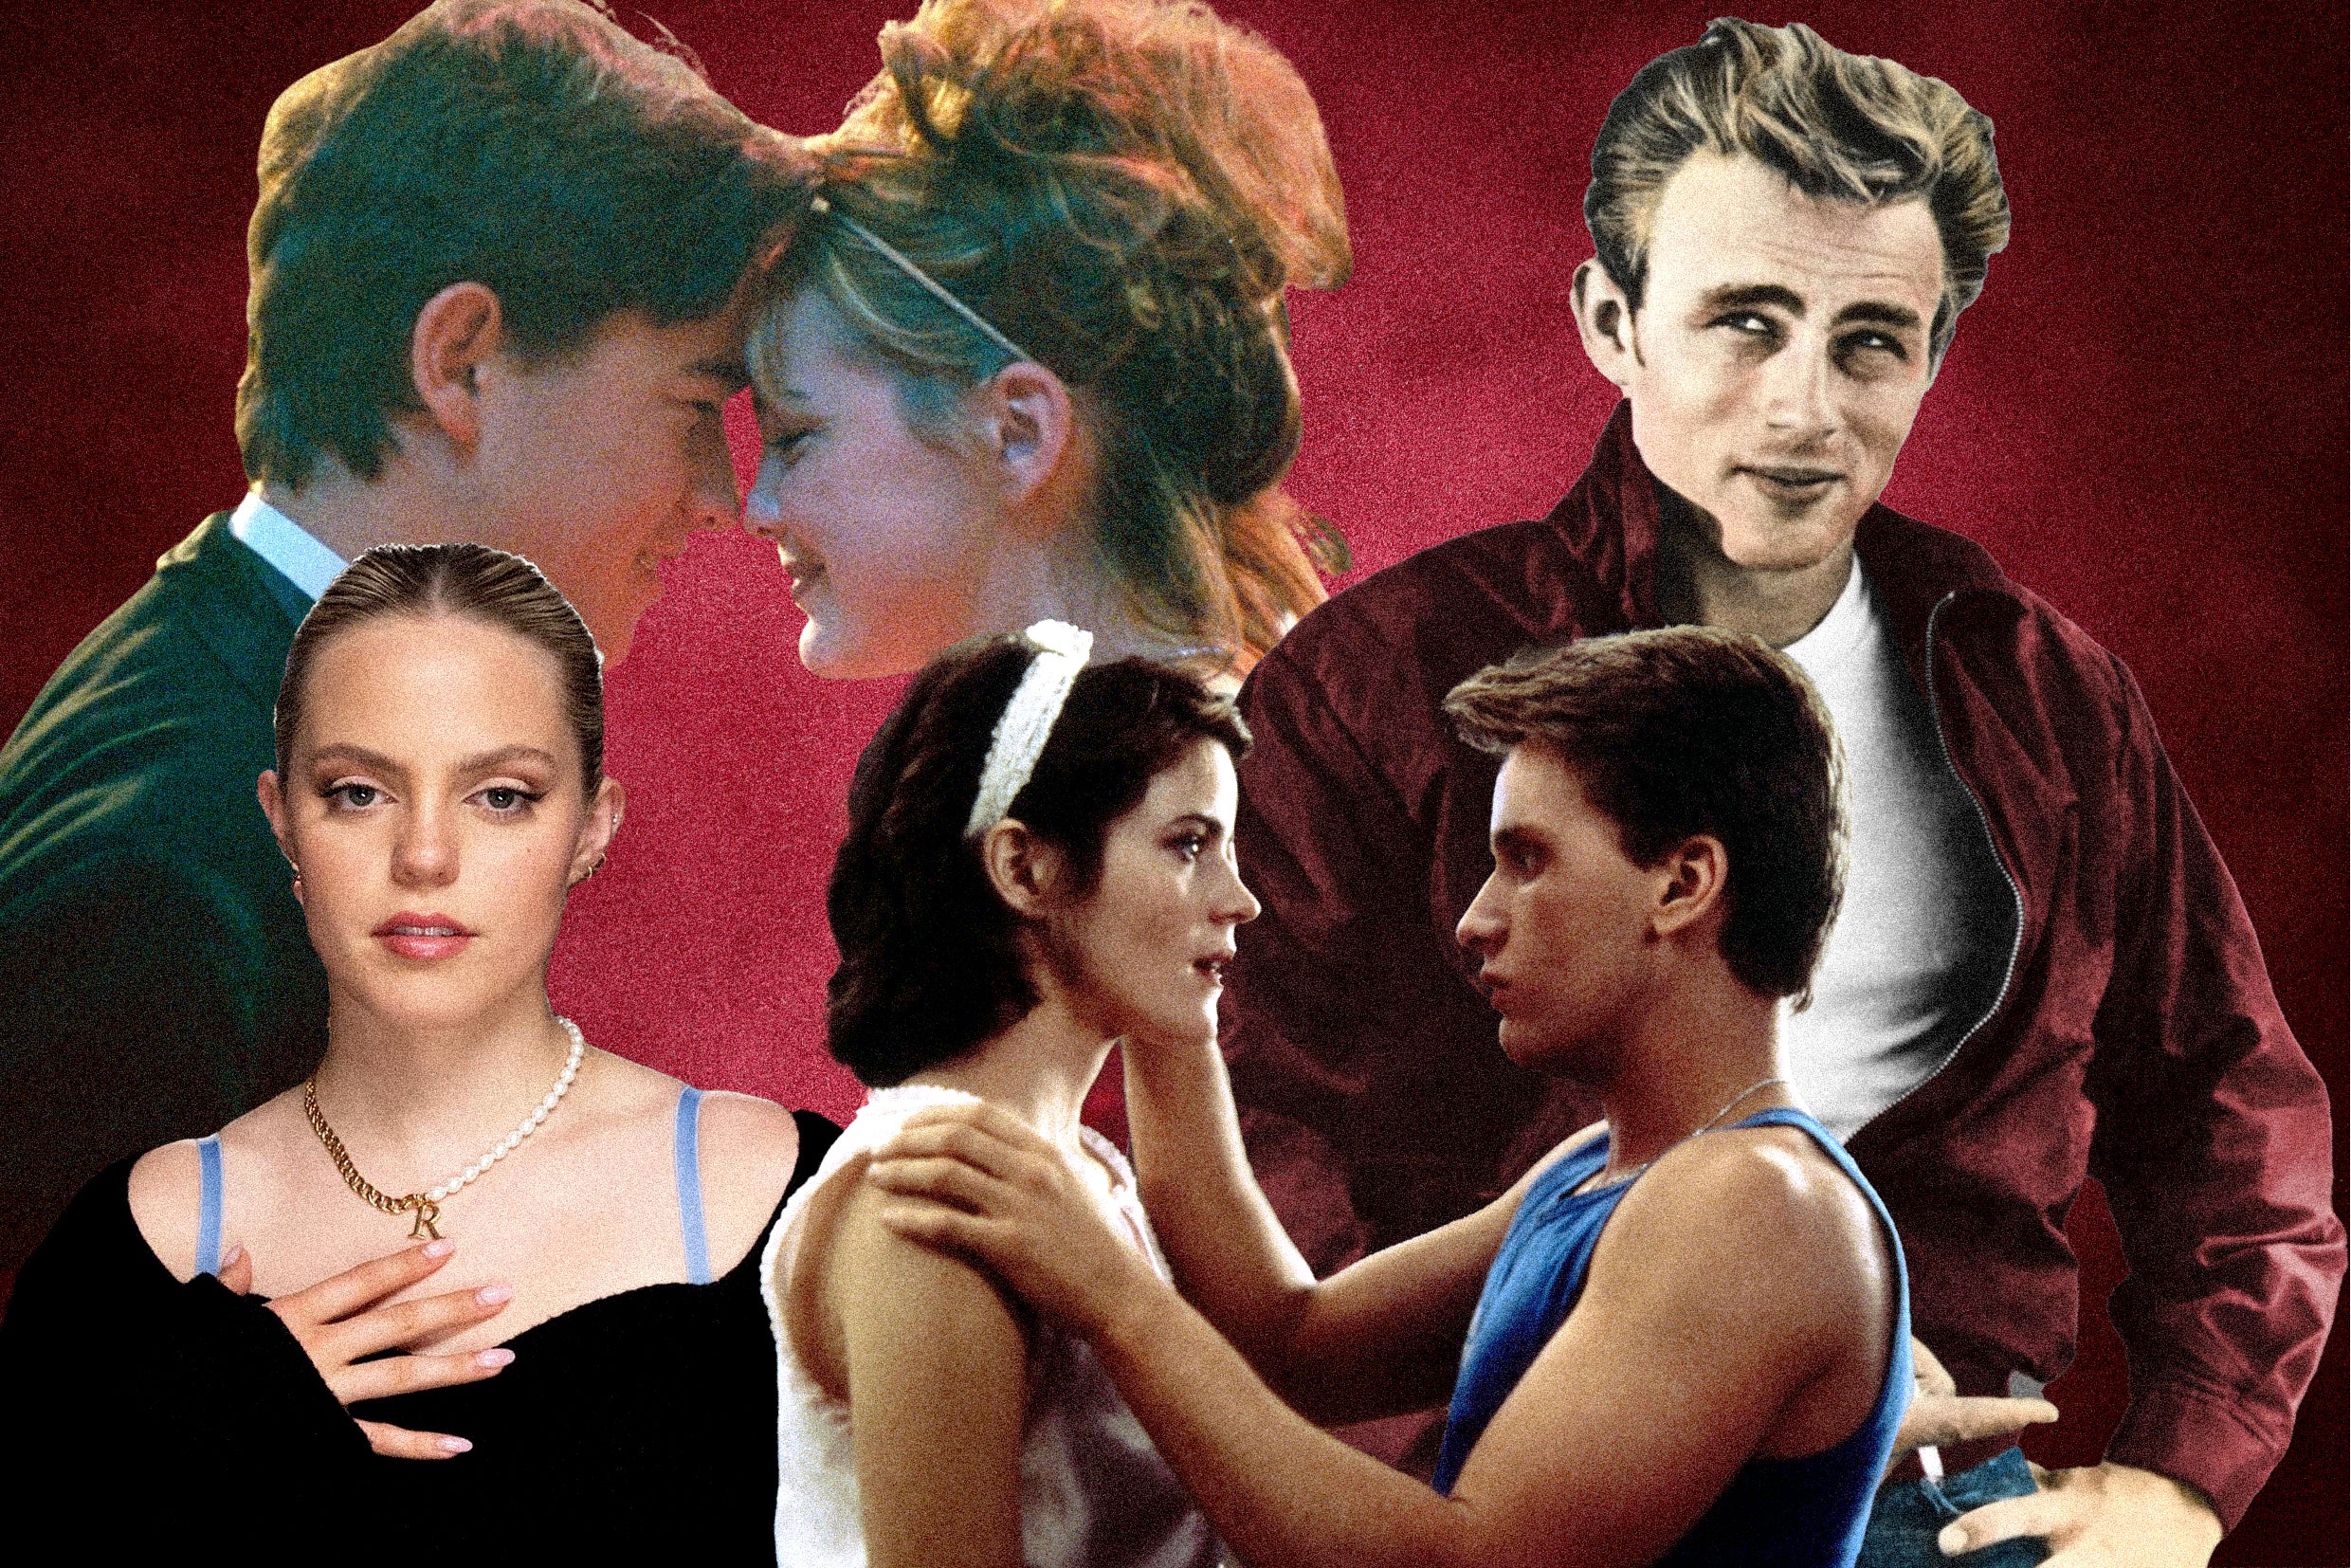 ‘10 Things I Hate About You, ‘Rebel Without a Cause’, ‘Mean Girls’ and ‘The Breakfast Club’ are among the teen flicks to have won over viewers